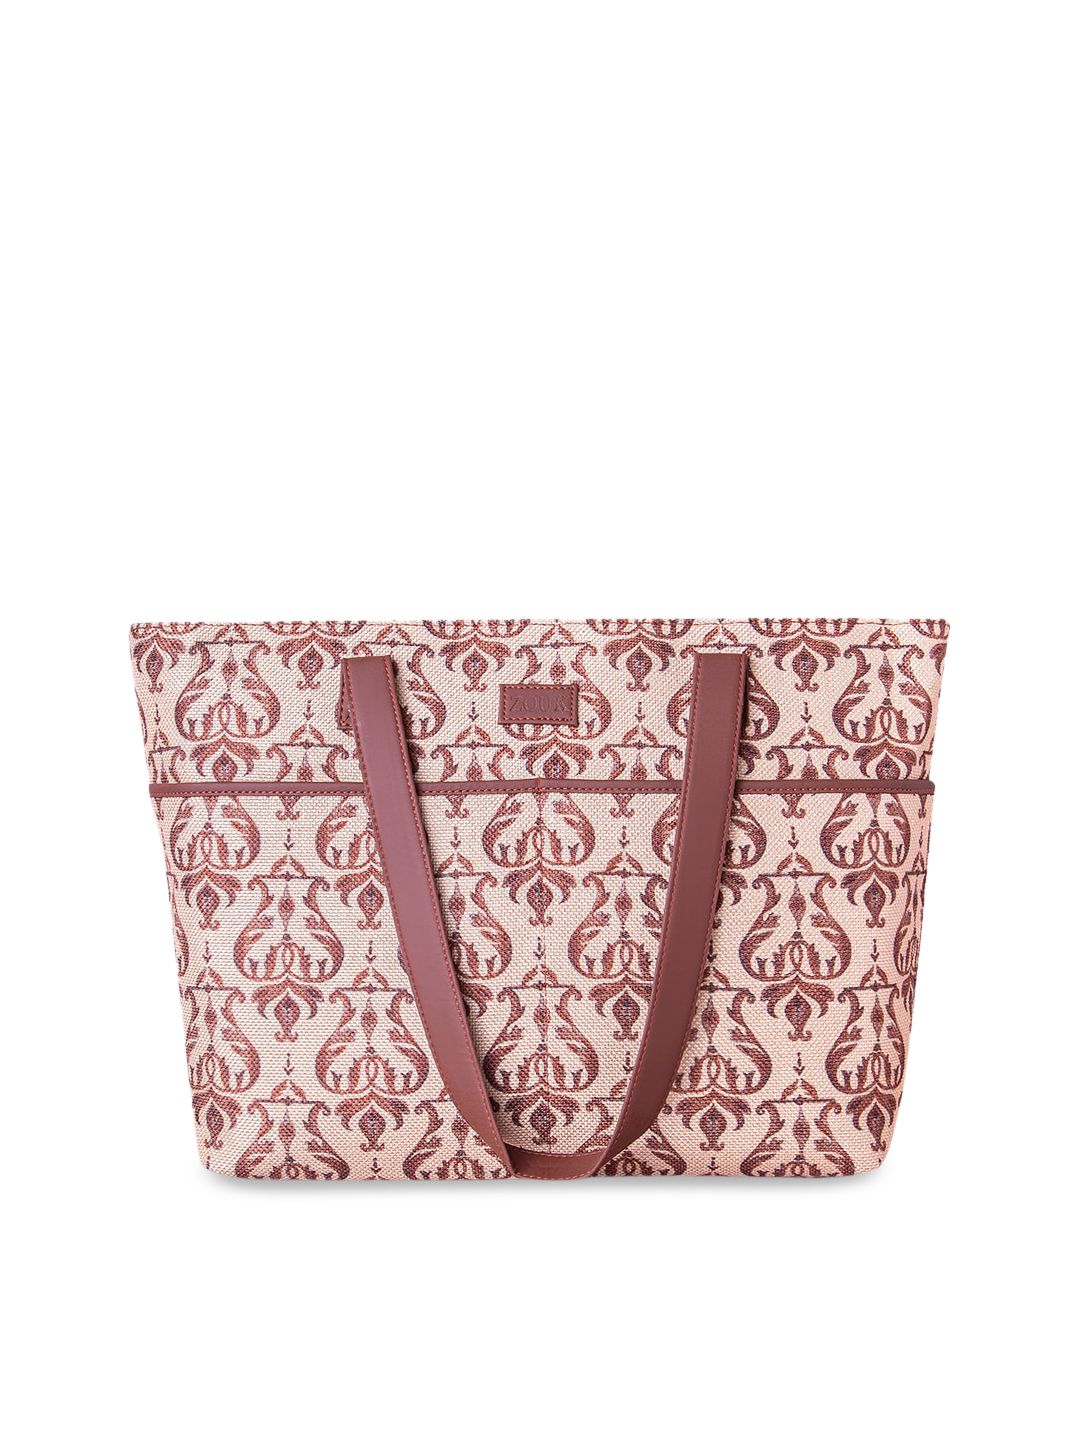 ZOUK Brown Floral Printed Structured Tote Bag Price in India